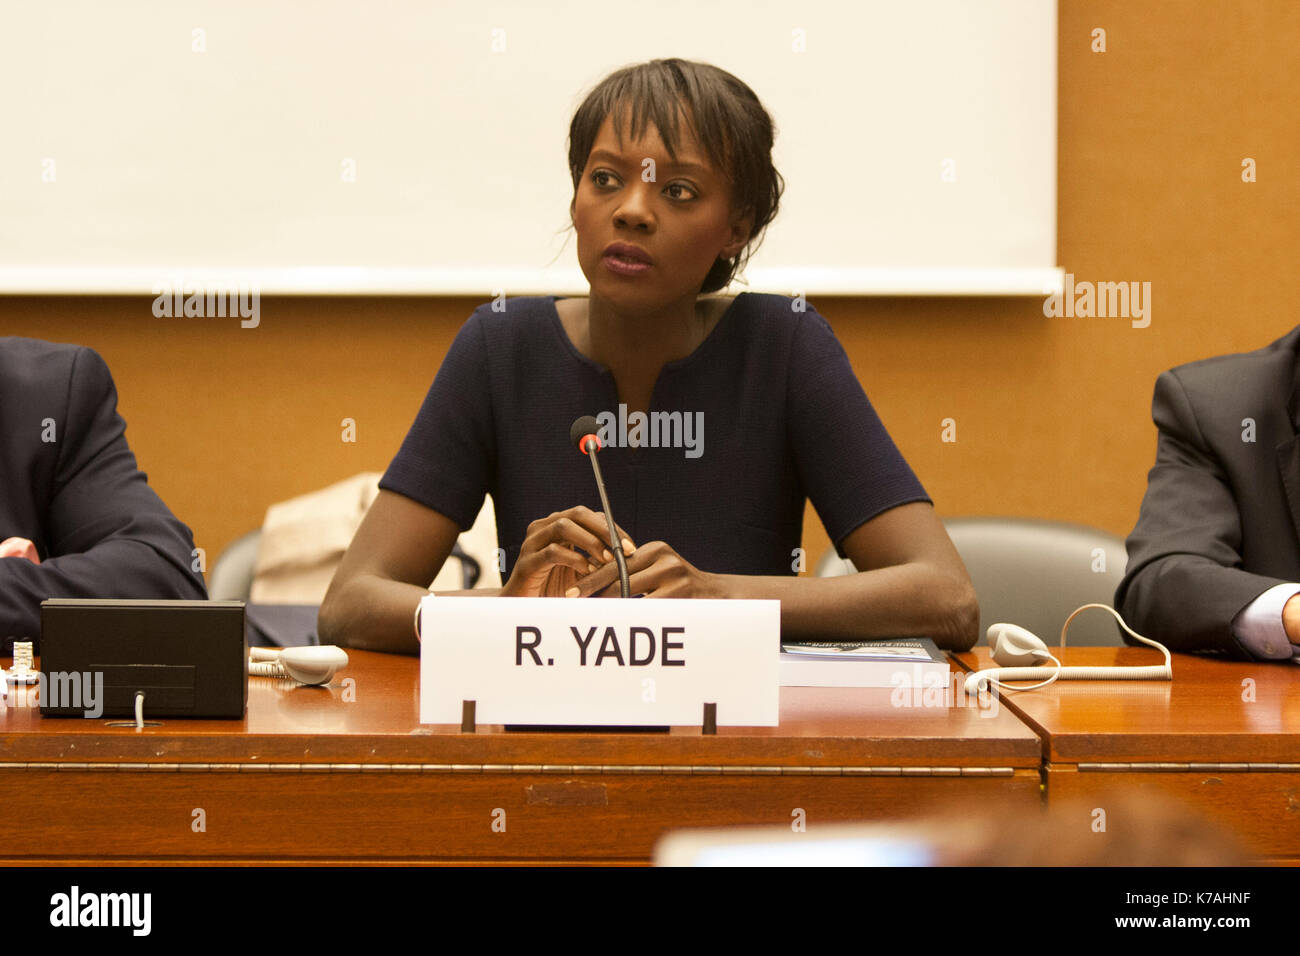 Rama Yade, Former French Secretary of State for Human Rights, United Nations, Geneva, Switzerland. 14th Sep, 2017. Human Rights experts and personalities in a conference on September 13, 2017, at the 36th session of the Human Rights Council in Geneva, supported the request of Asma Jahangir, the UN Special Rapporteur on the situation of human rights in Iran, for investigation of the 1988 Massacre in Iran. Credit: Siavosh Hosseini/Alamy Live News Stock Photo